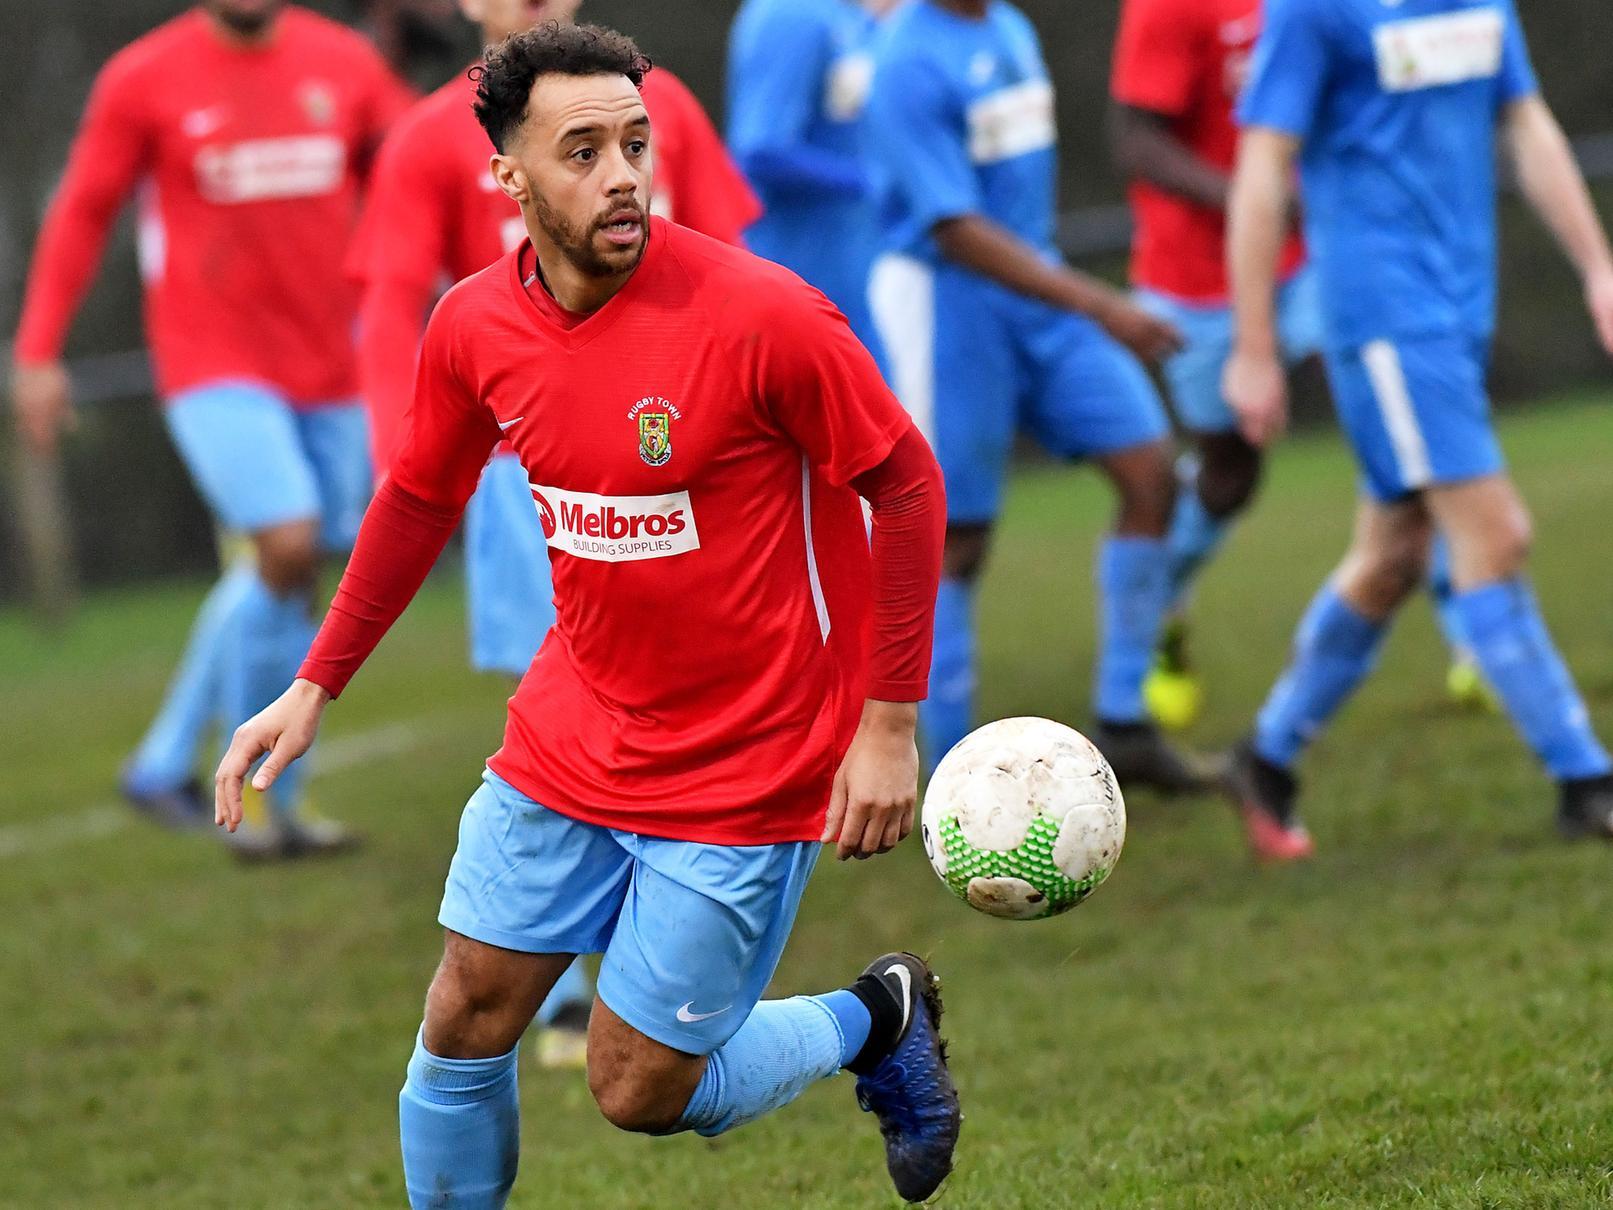 Assistant manager Justin Marsden made a rare start in midfield